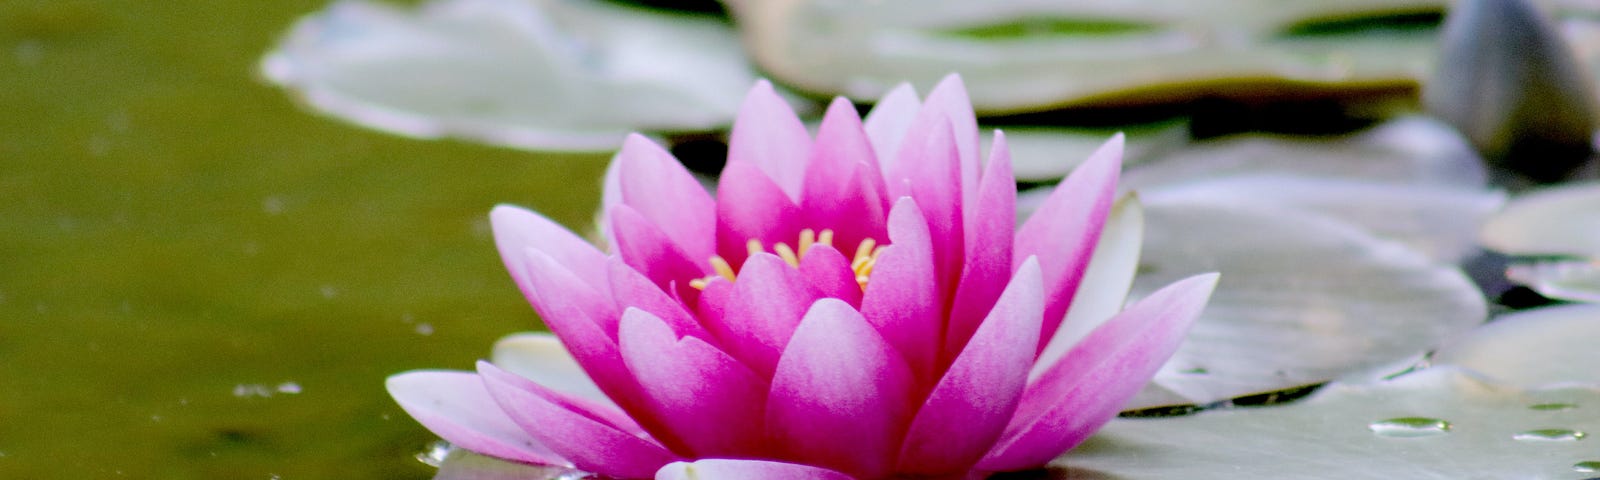 A vibrant pink water lily.